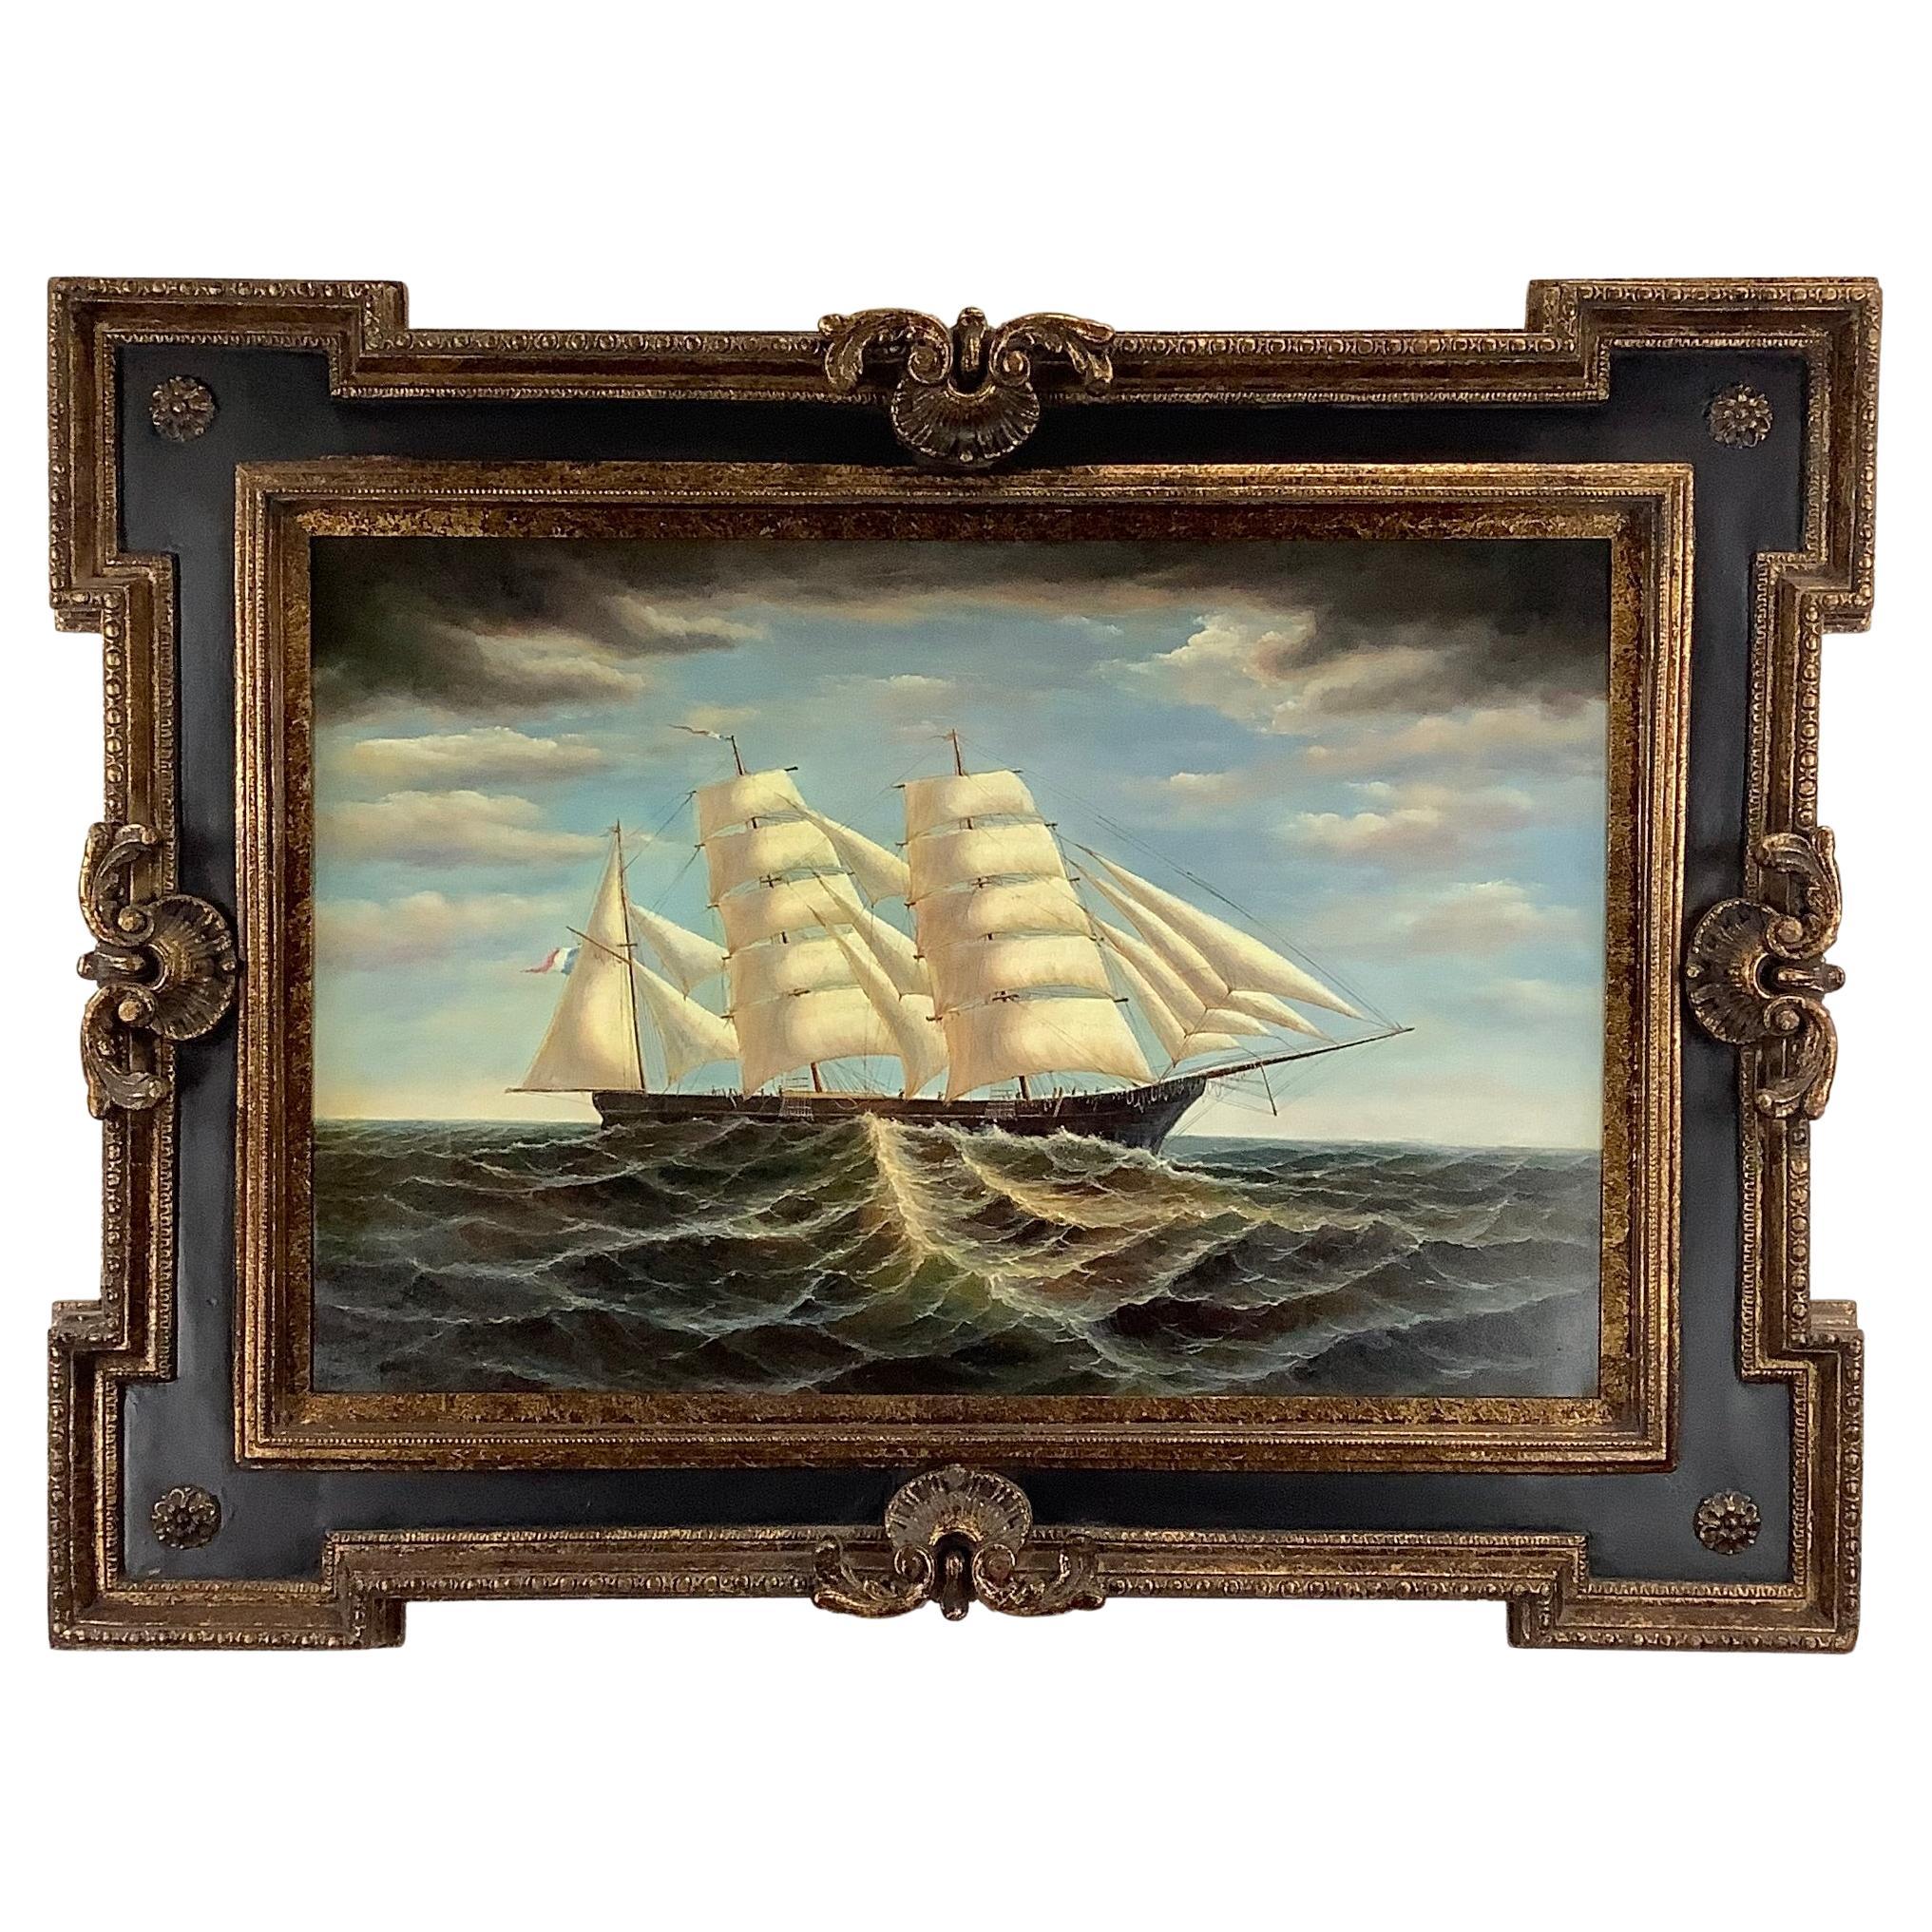 Nautical Clipper Ship Painting in Ornate Wood Frame